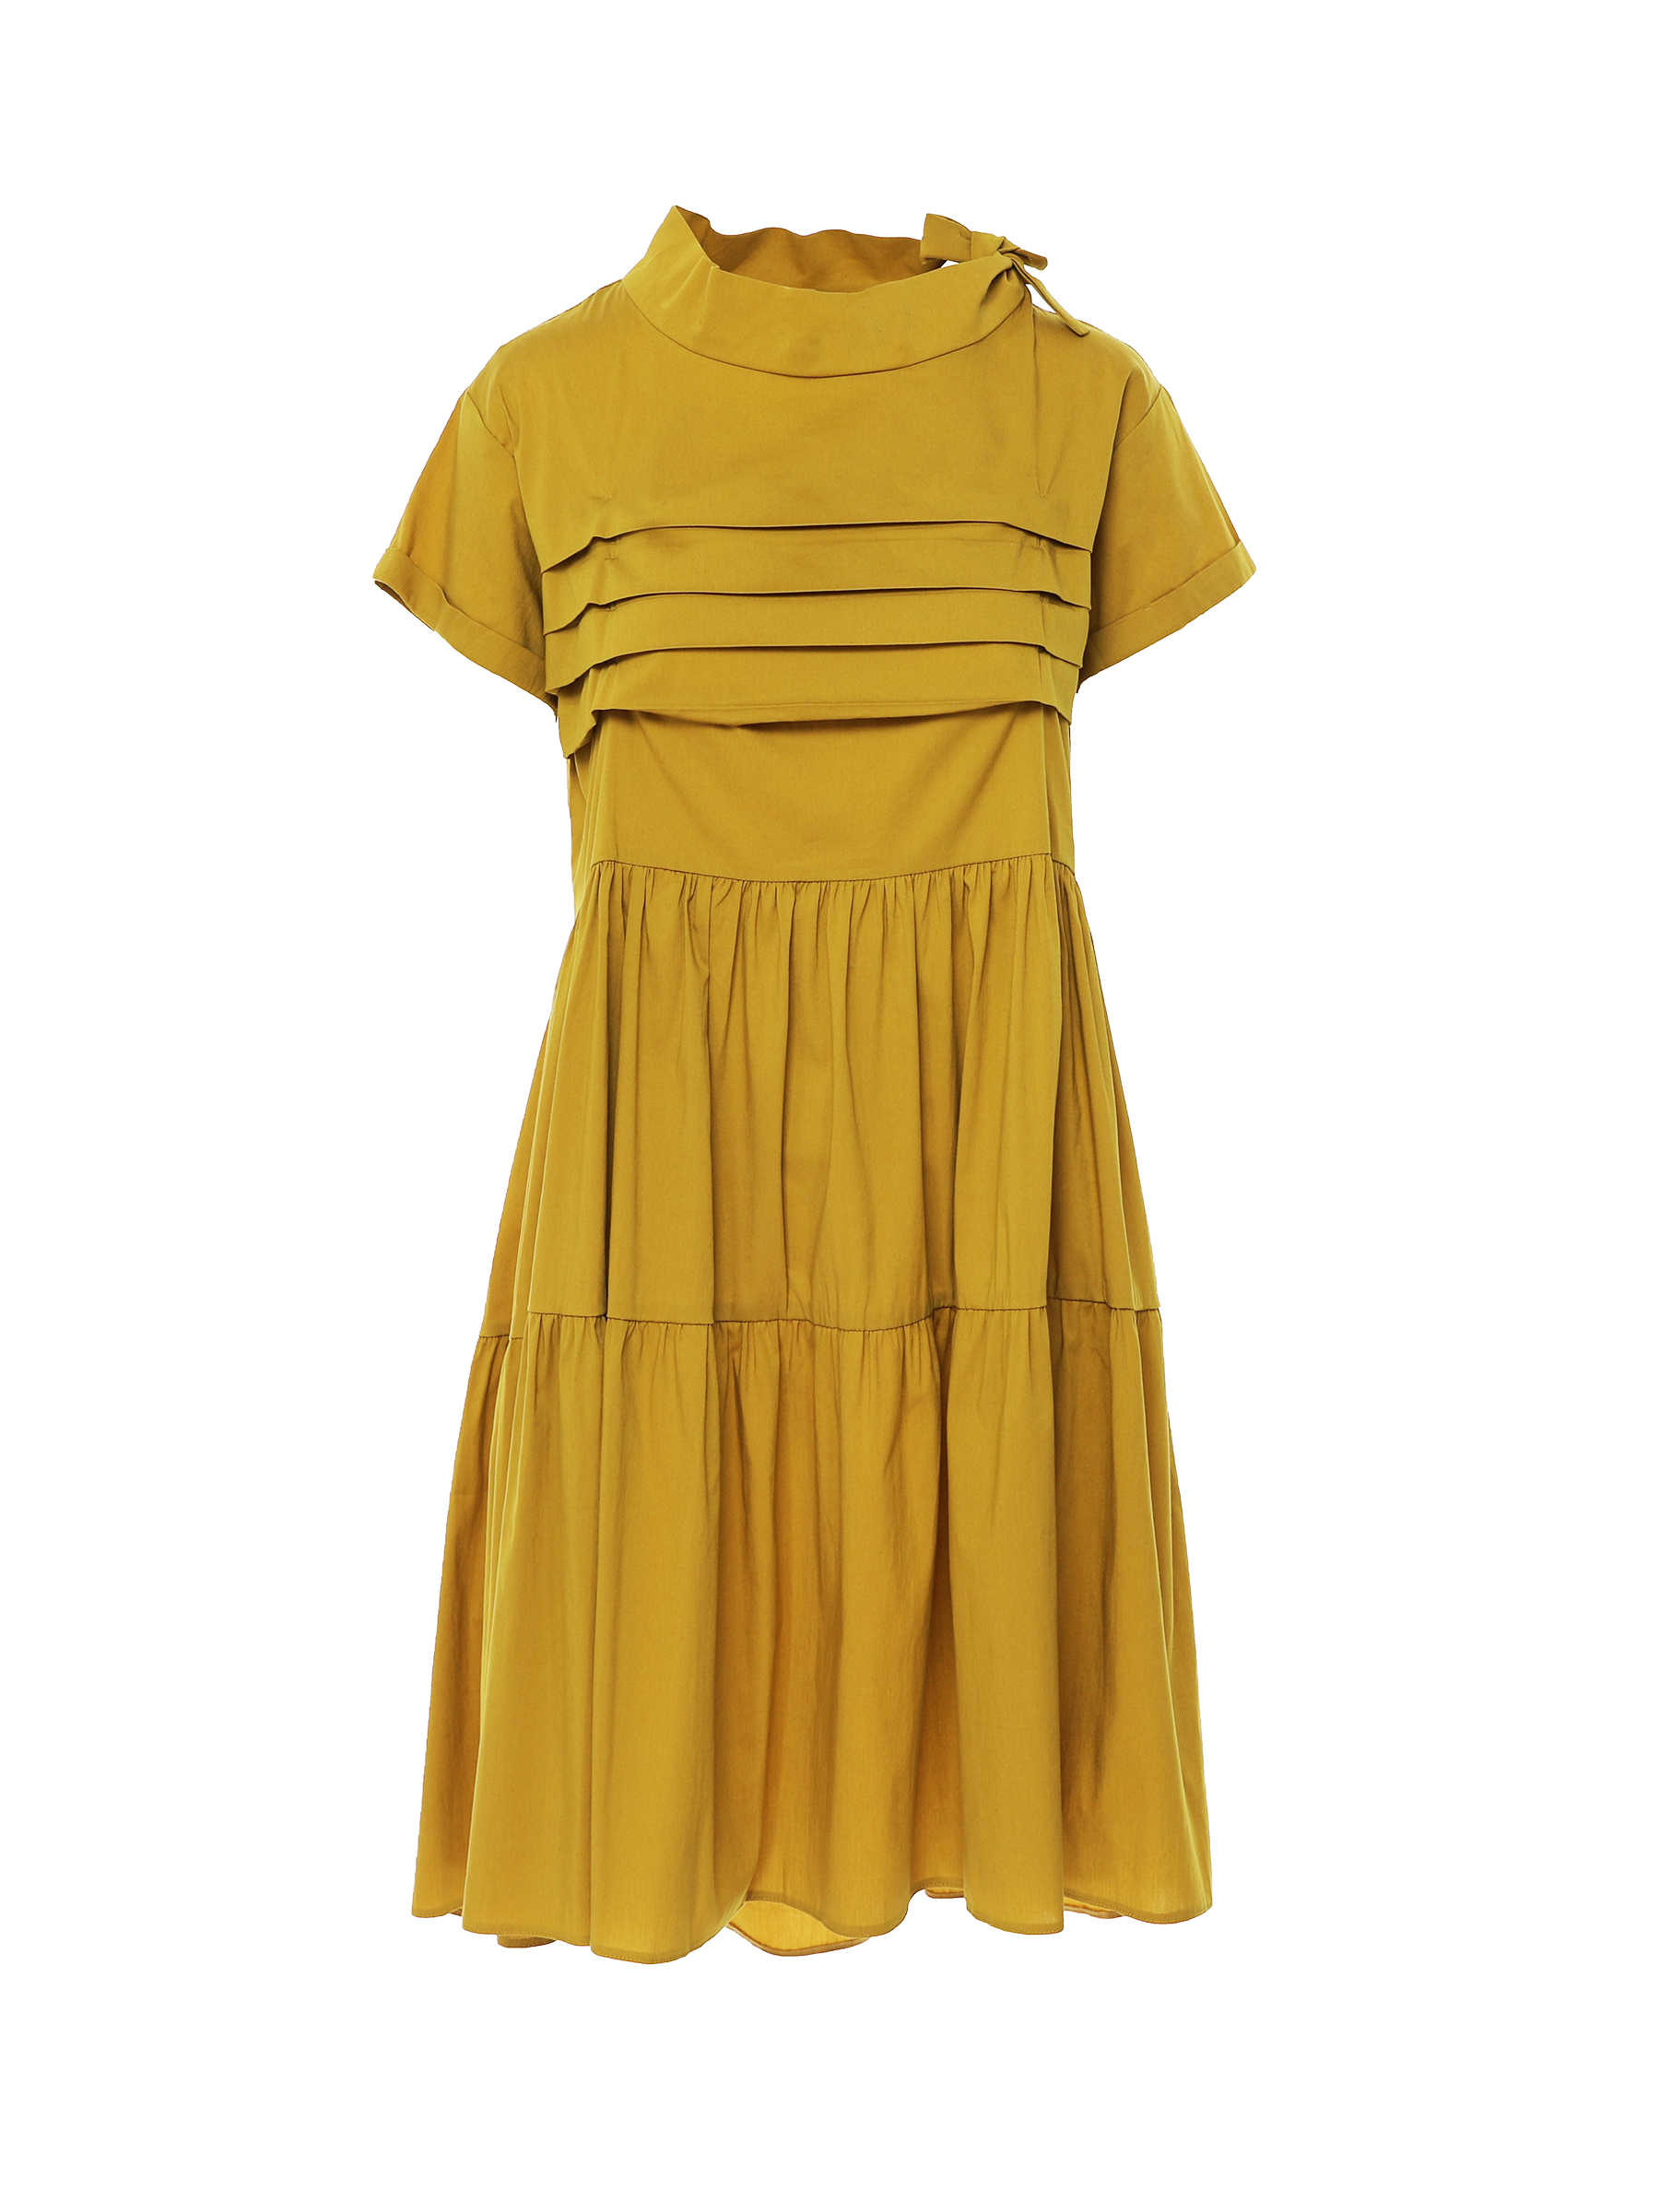 Pleated yellow dress with round collar ruffles and short sleeves